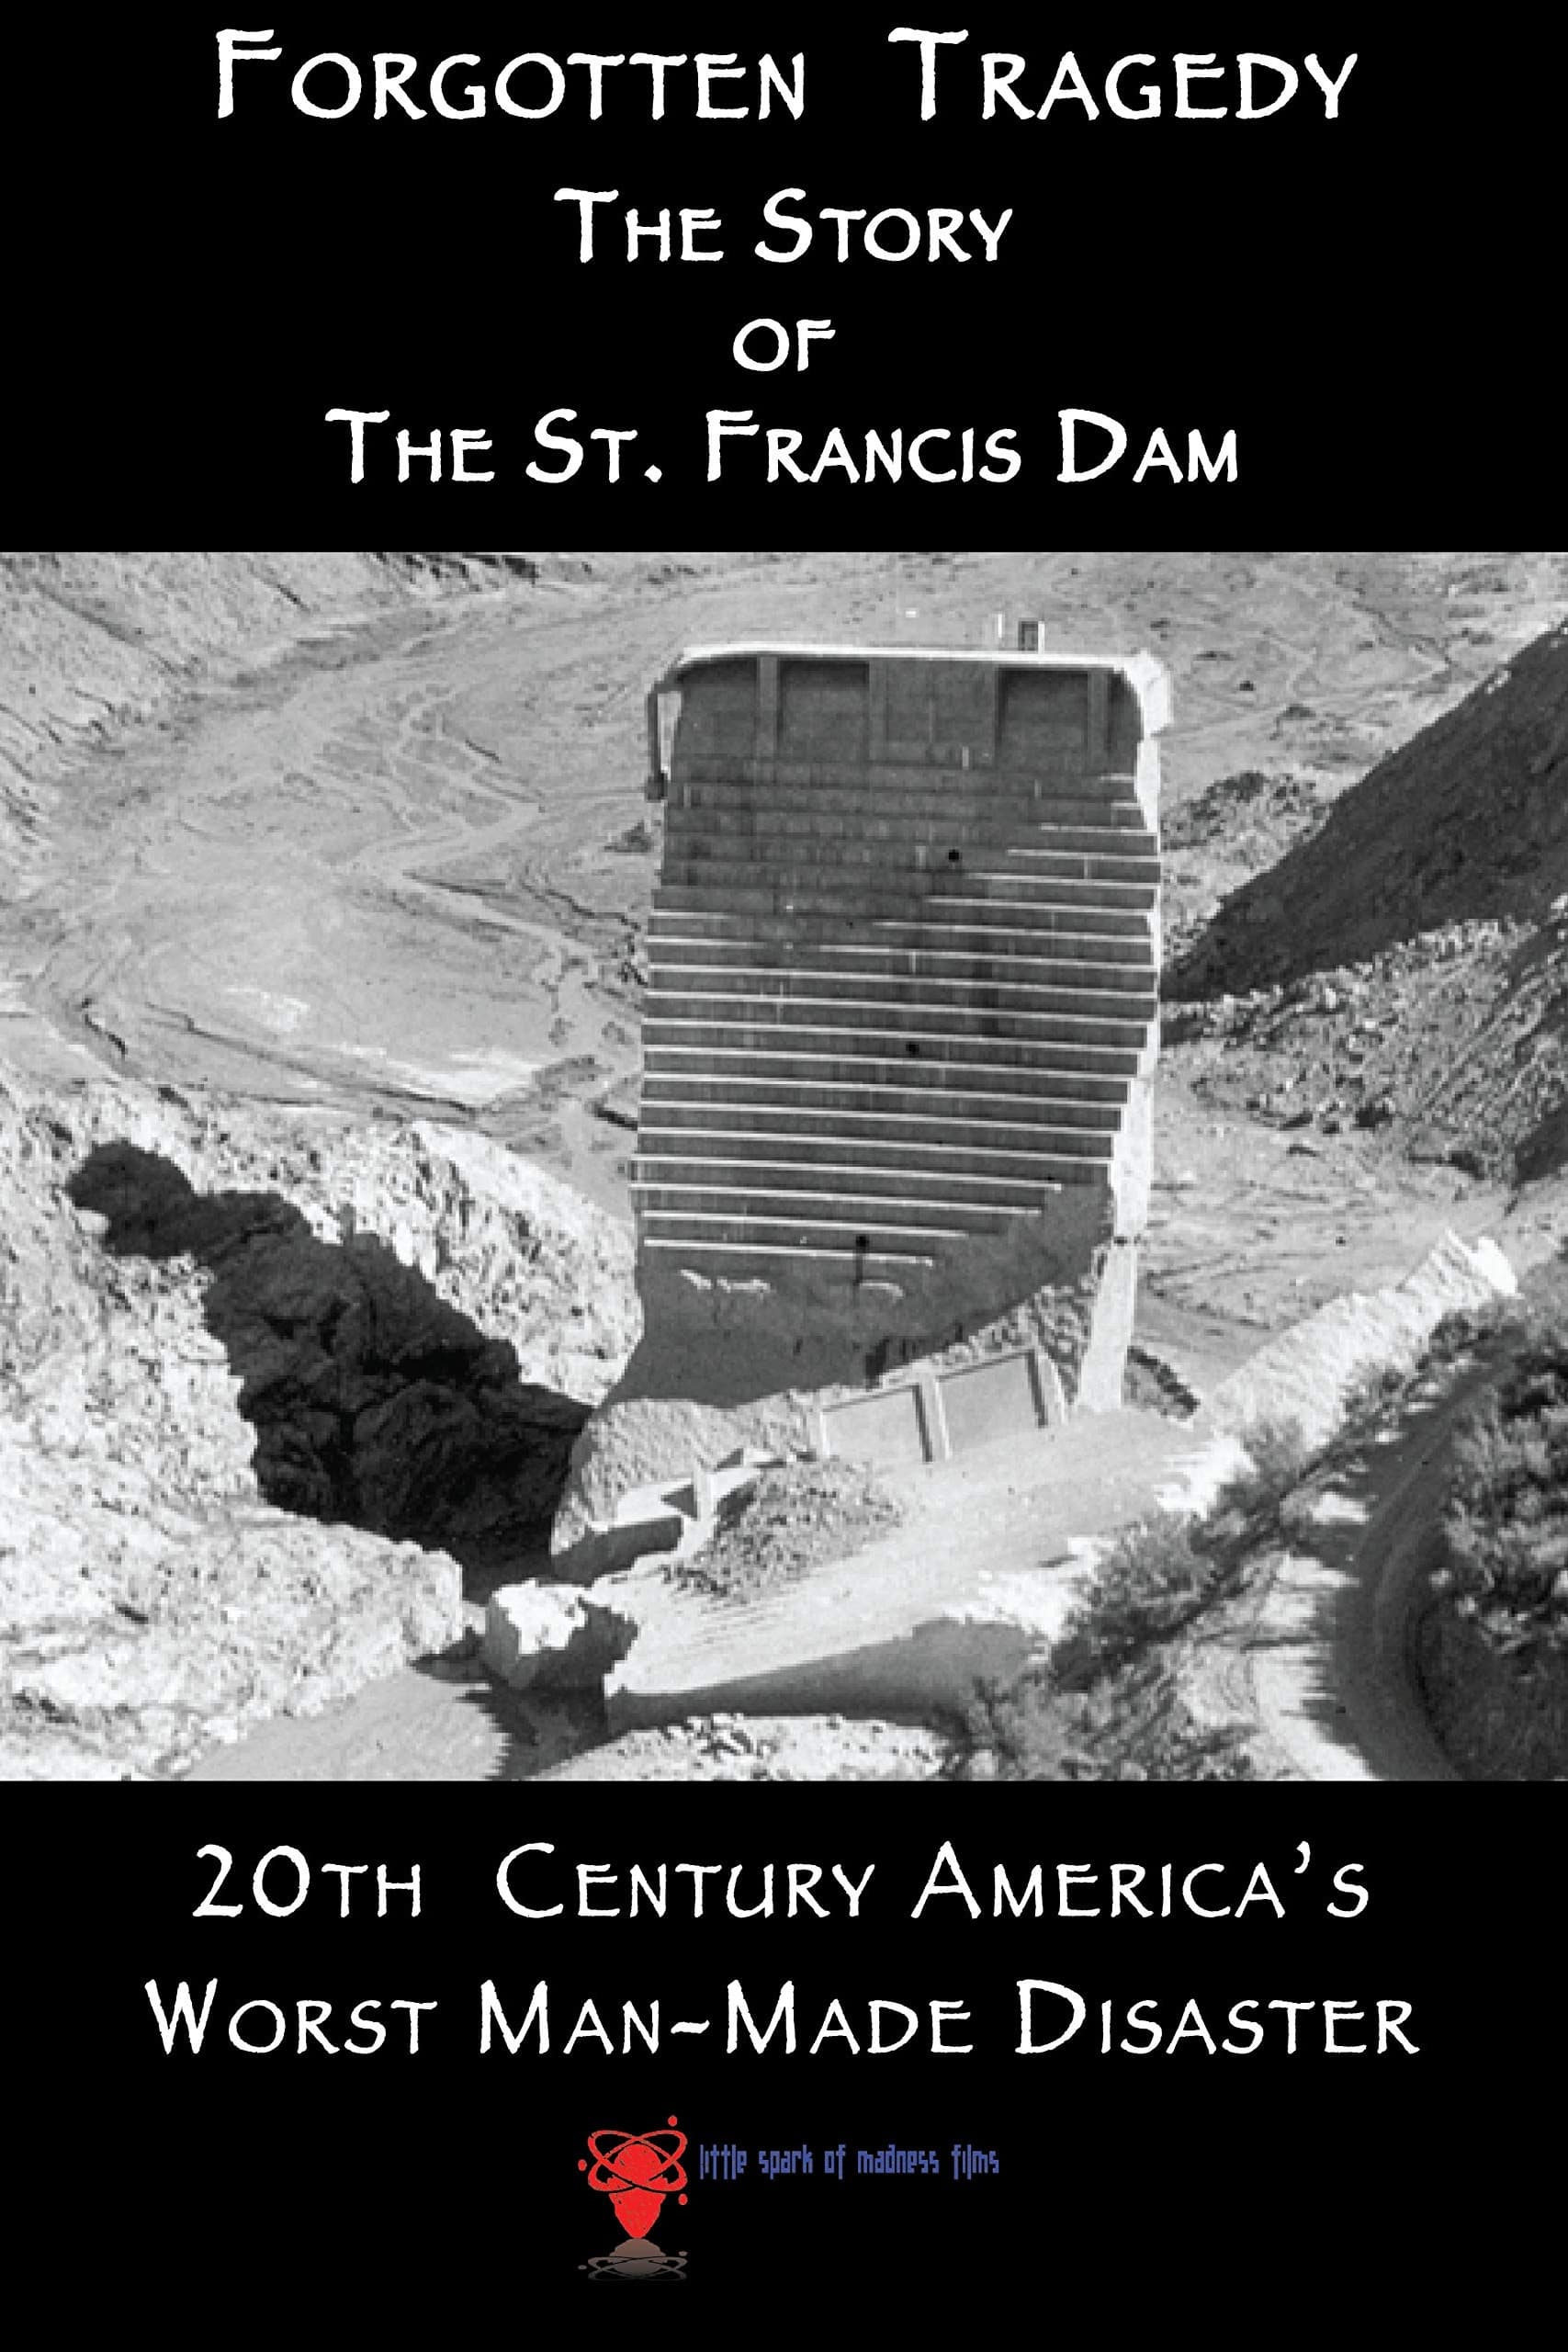 Forgotten Tragedy: The Story of the St. Francis Dam